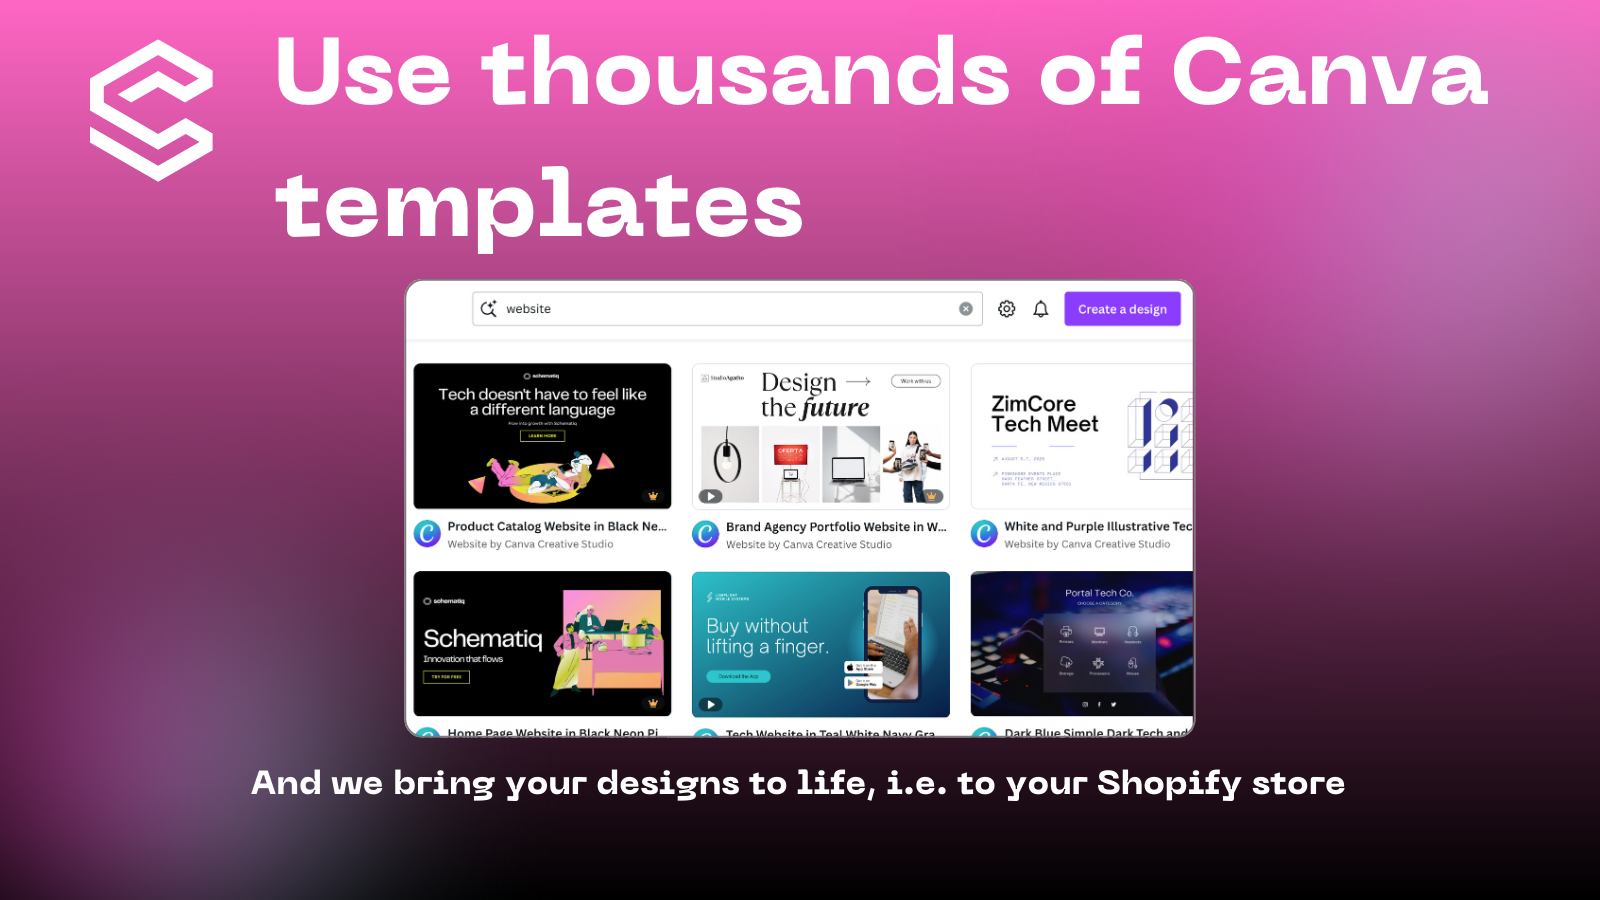 Use thousands of Canva templates